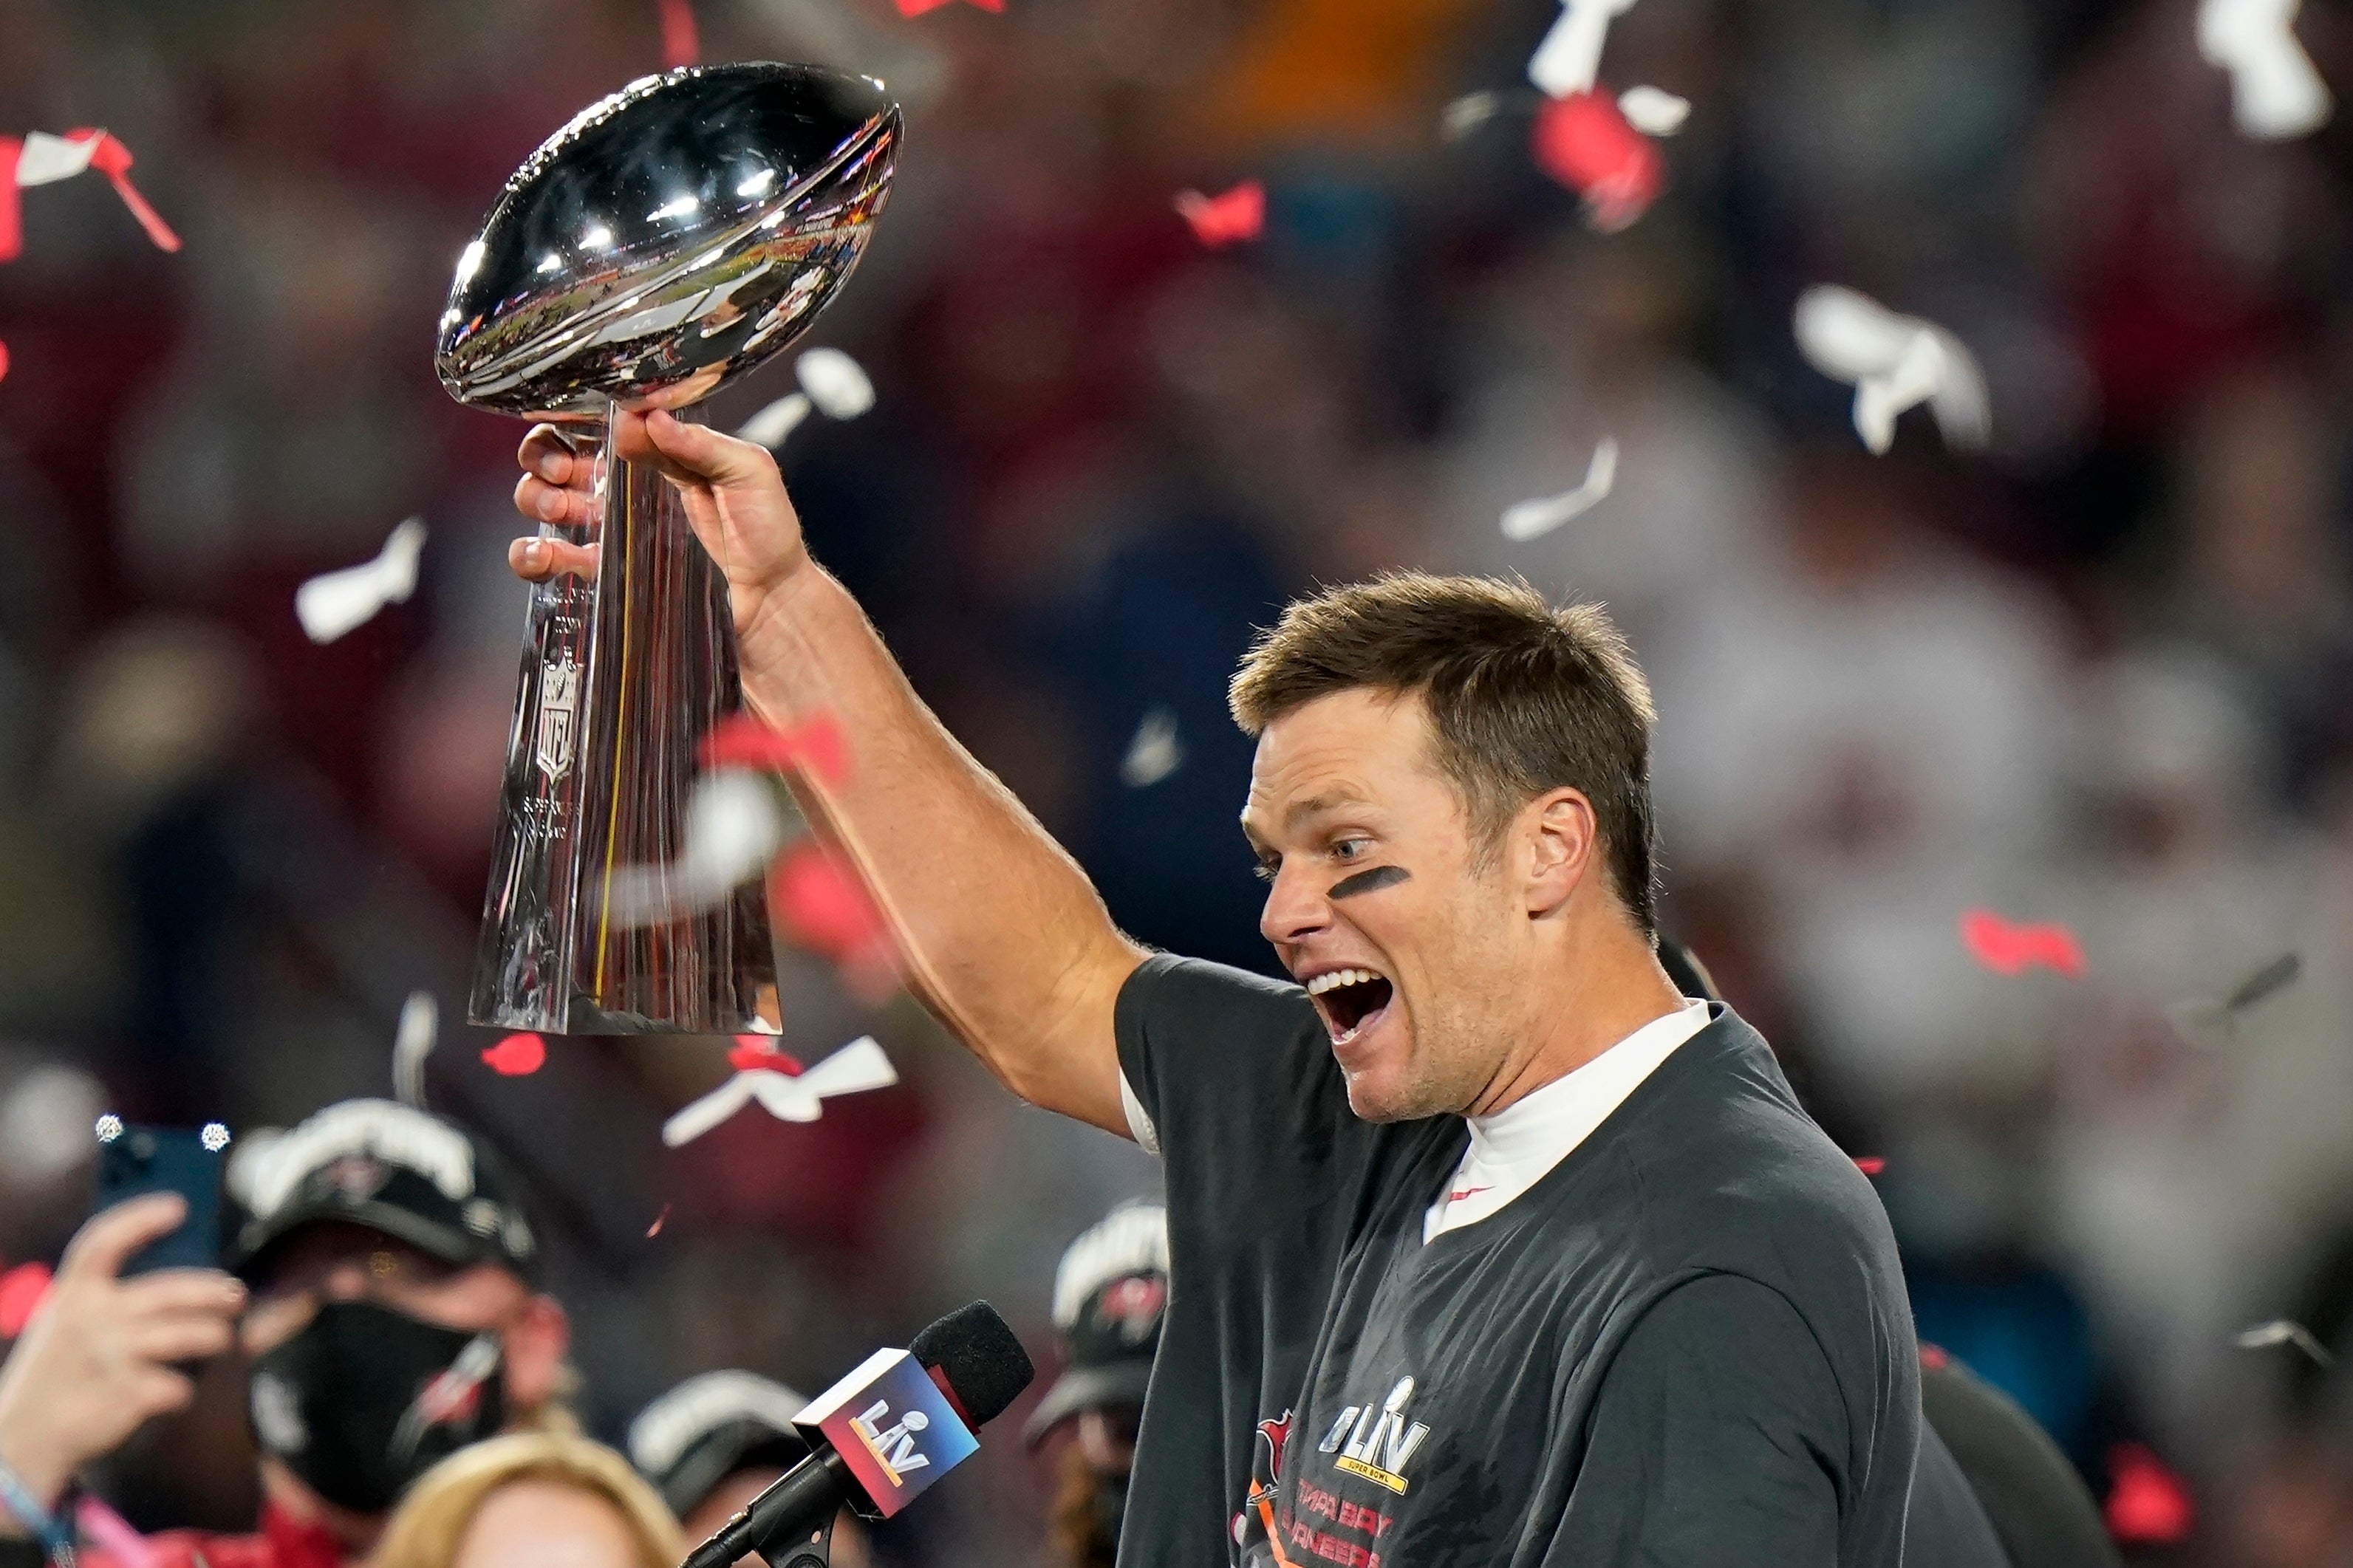 File. In this 7 February 2021 photo, Tampa Bay Buccaneers quarterback Tom Brady celebrates with the Vince Lombardi Trophy after the team's NFL Super Bowl 55 football game against the Kansas City Chiefs